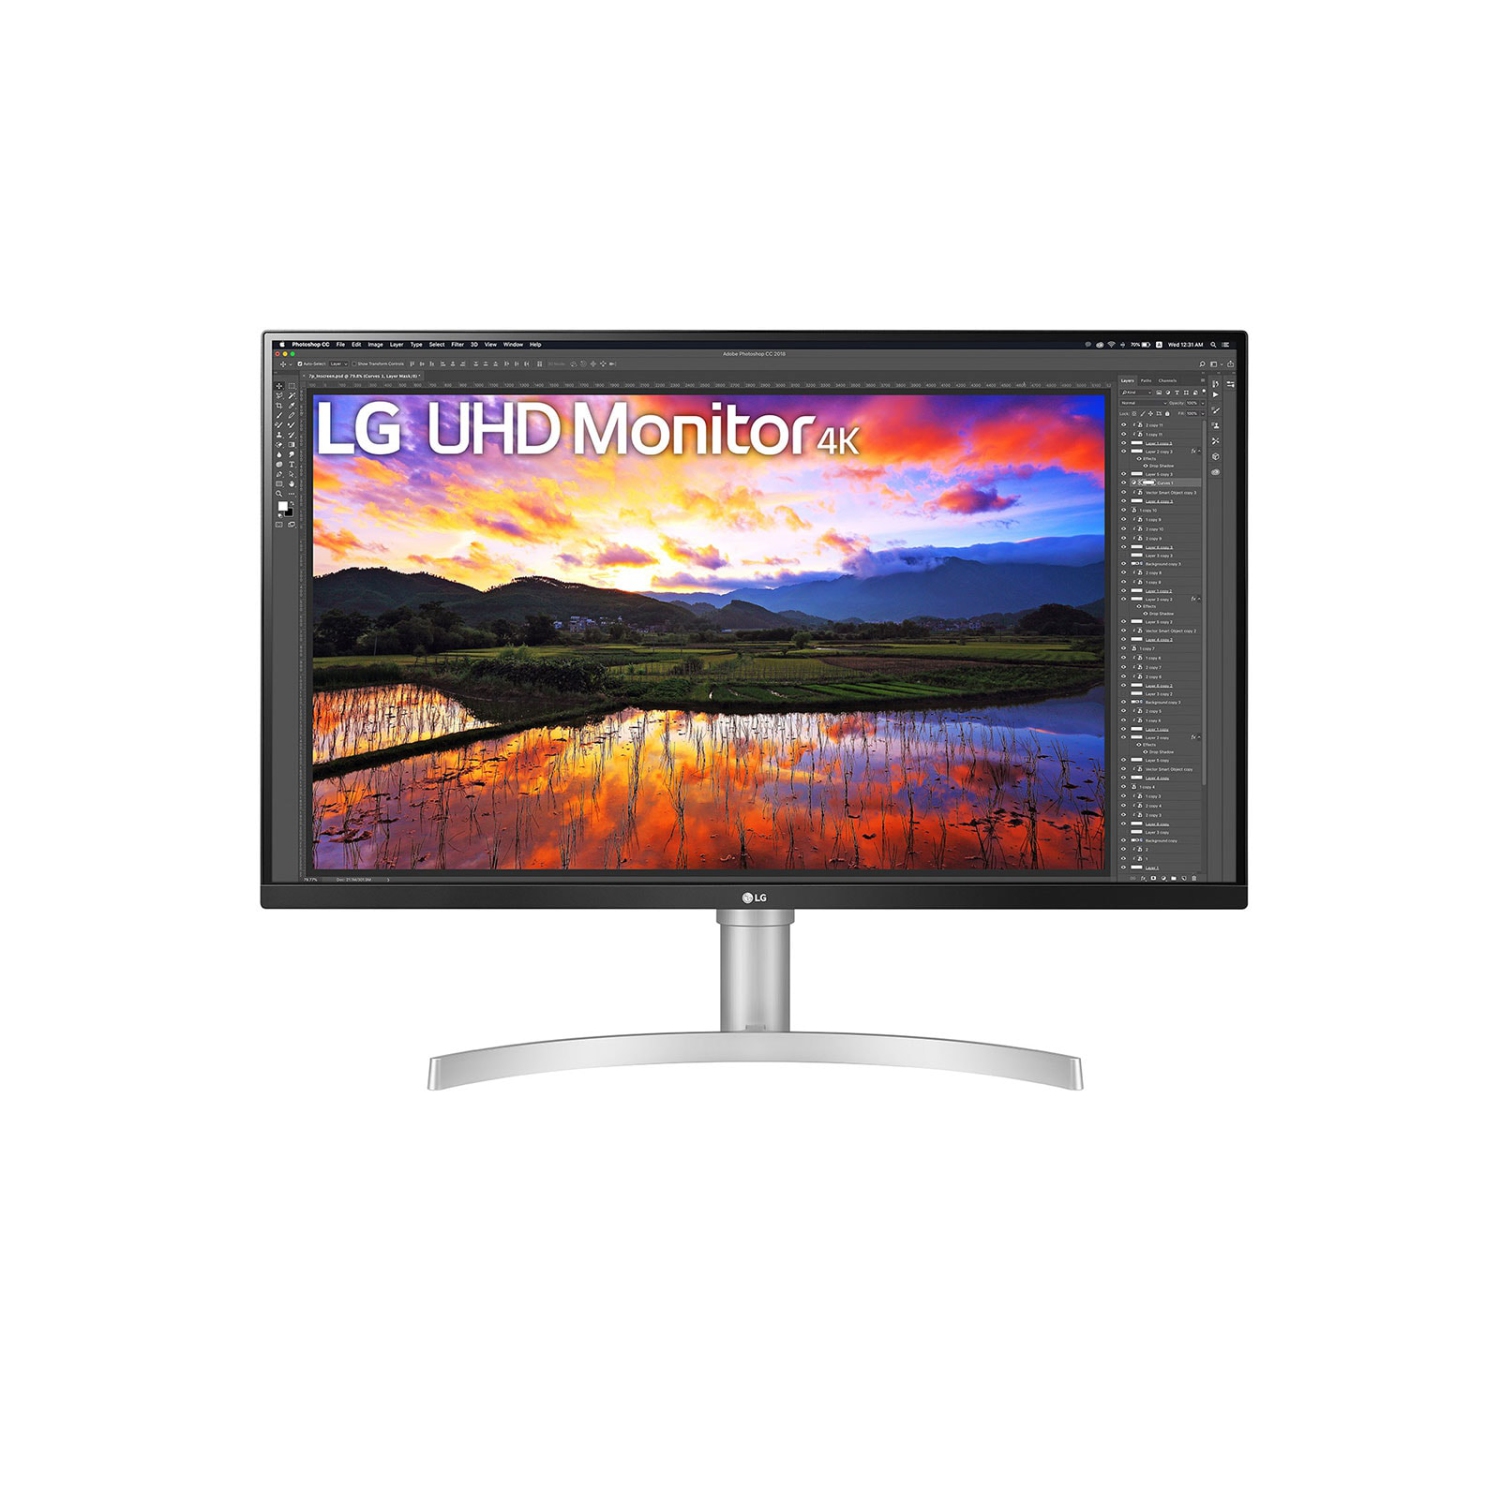 LG 32" UltraFine UHD 4K (3840 x 2160) IPS HDR, DCI-P3 95%, Colour Calibrated, FreeSync, Built-in MAXX Audio Speakers, Height Adjustable Monitor